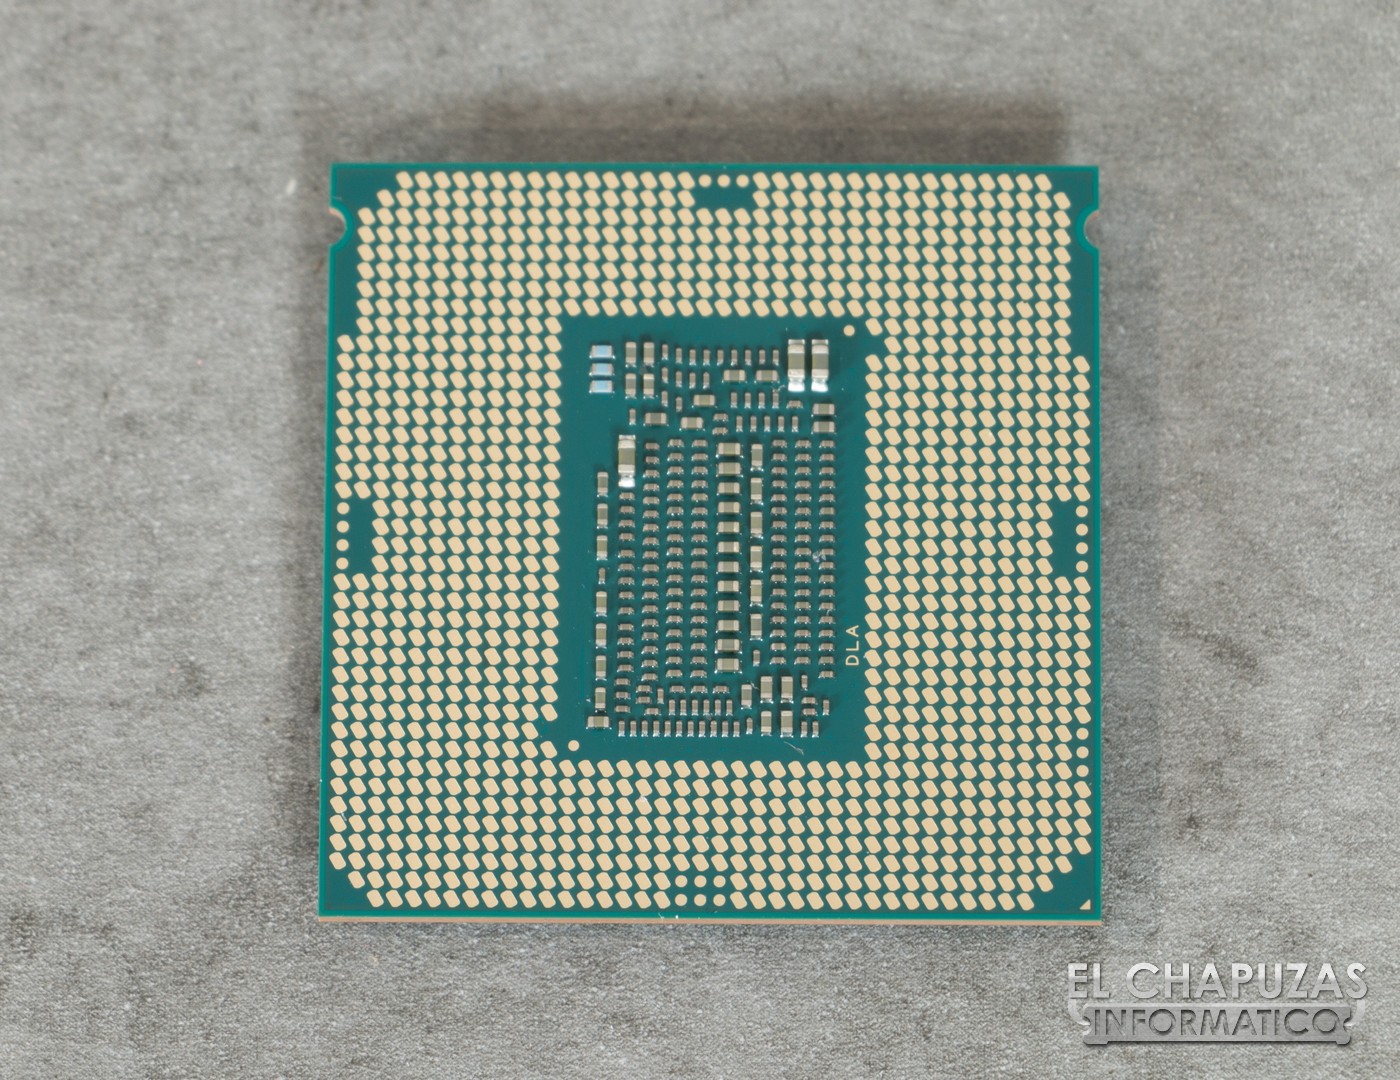 Intel Core i7-9700K review posted ahead of launch | VideoCardz.com